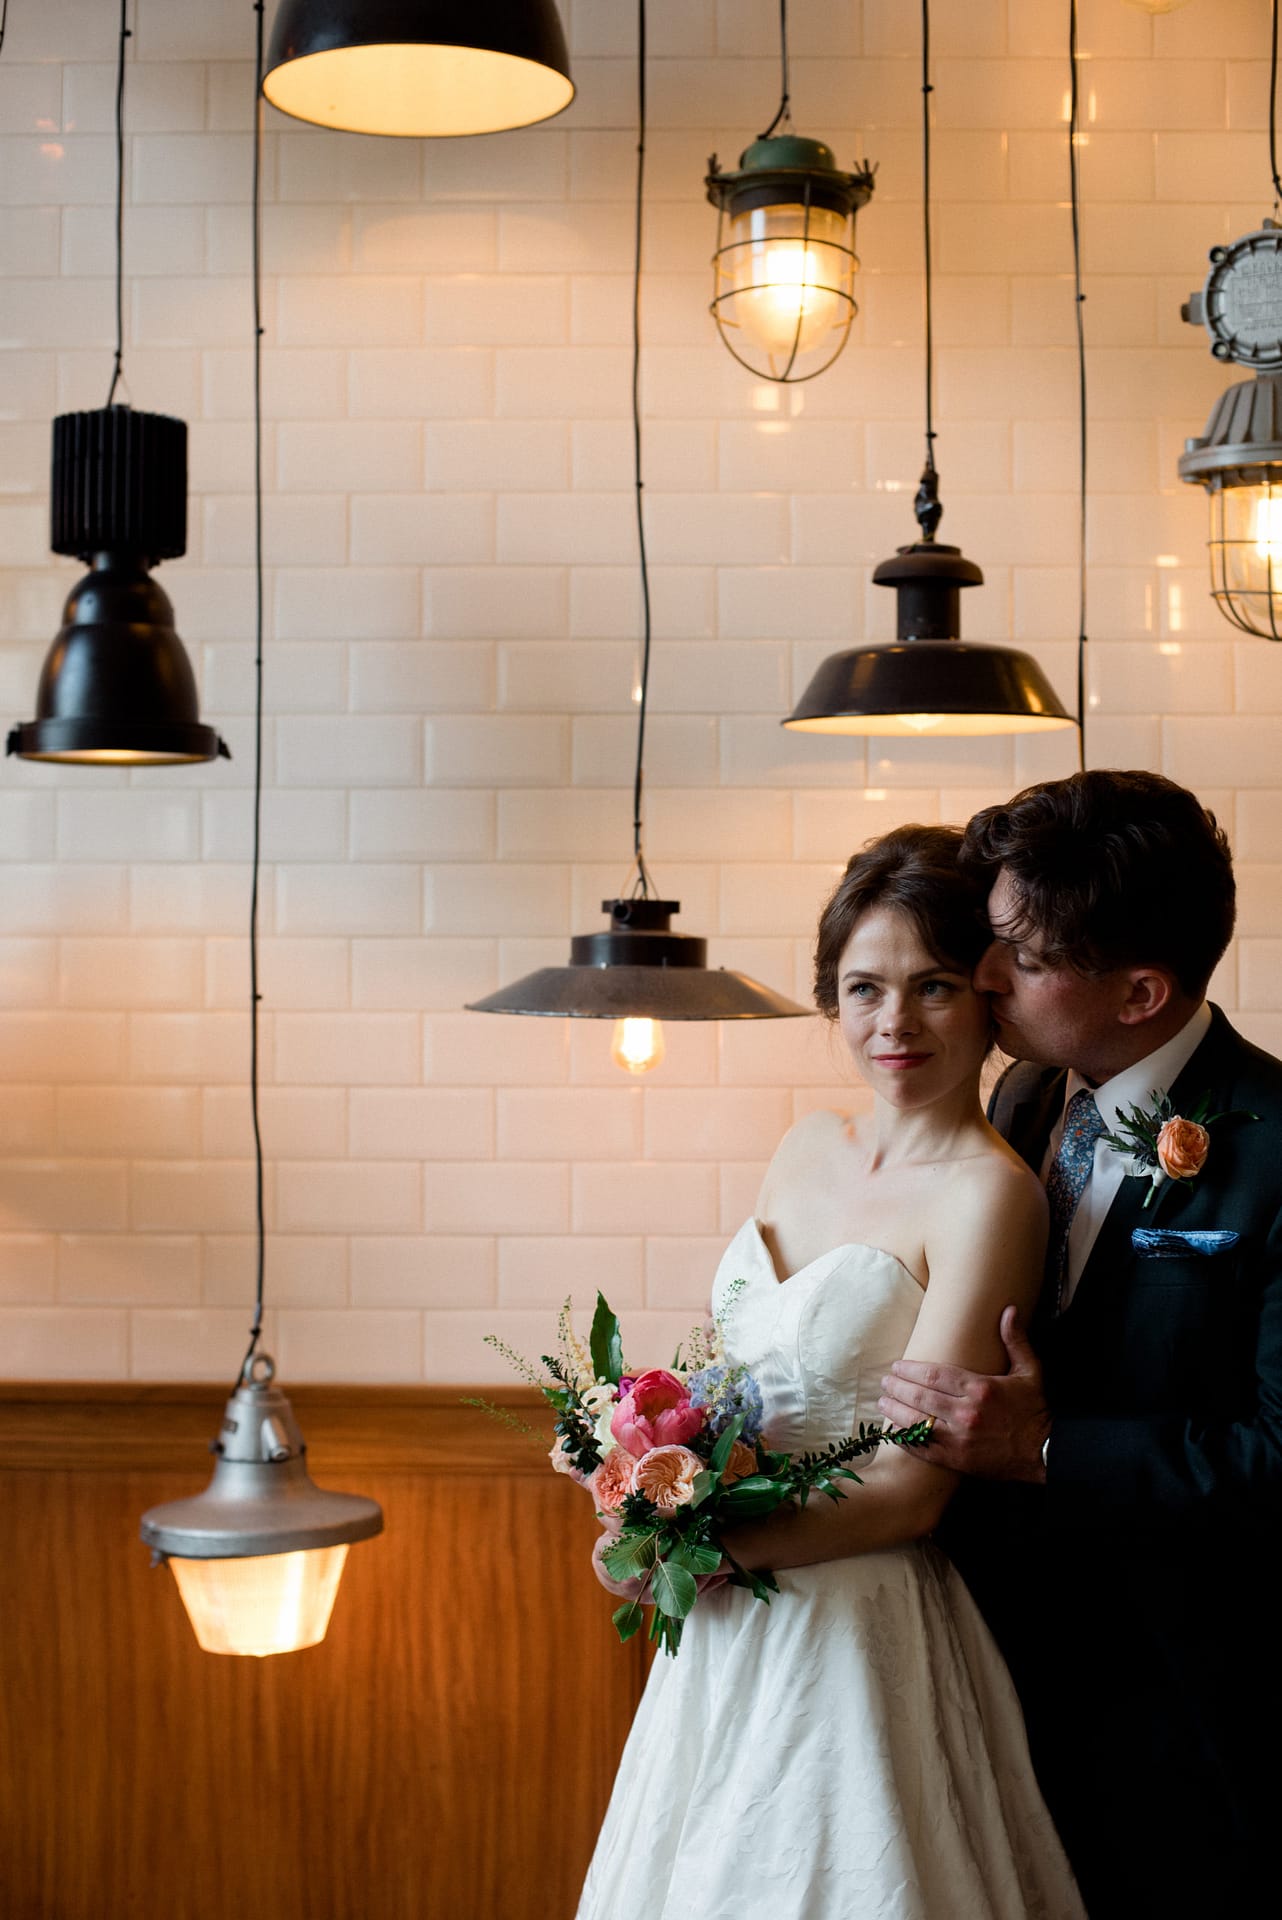 a portrait of a groom hugging his bride surrounded by interesting lamp shades